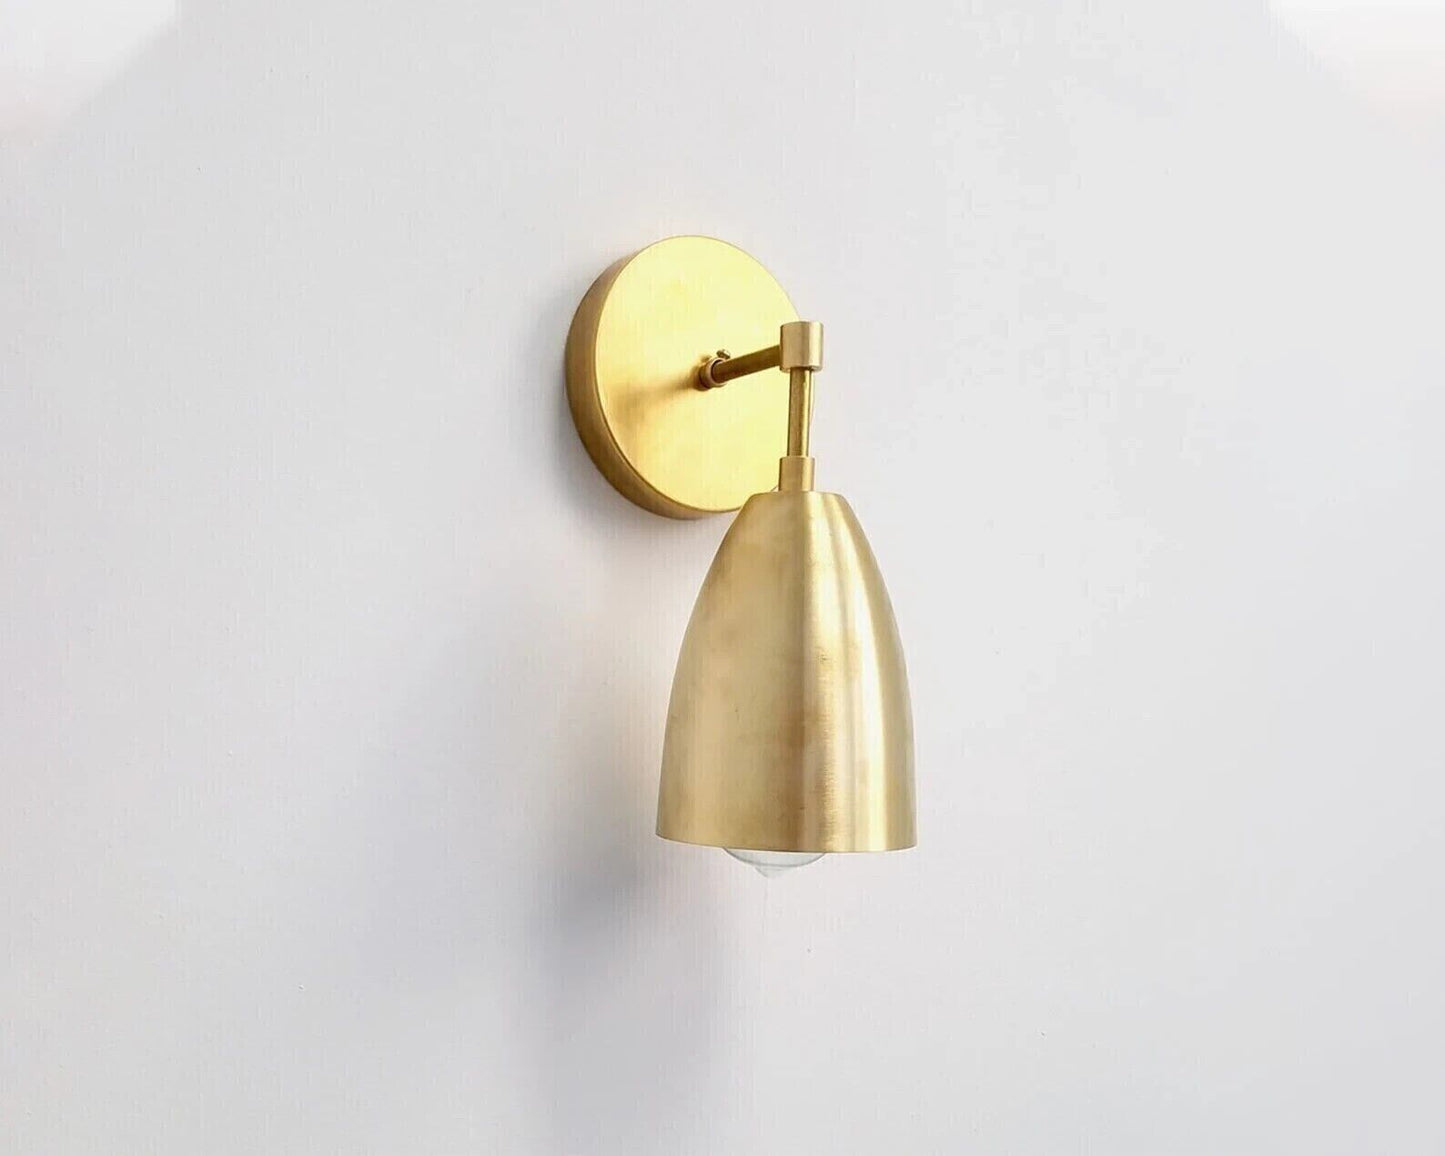 Brass Light Fixture Sconce - Mid Century Modern Wall Lamp in Brushed Brass